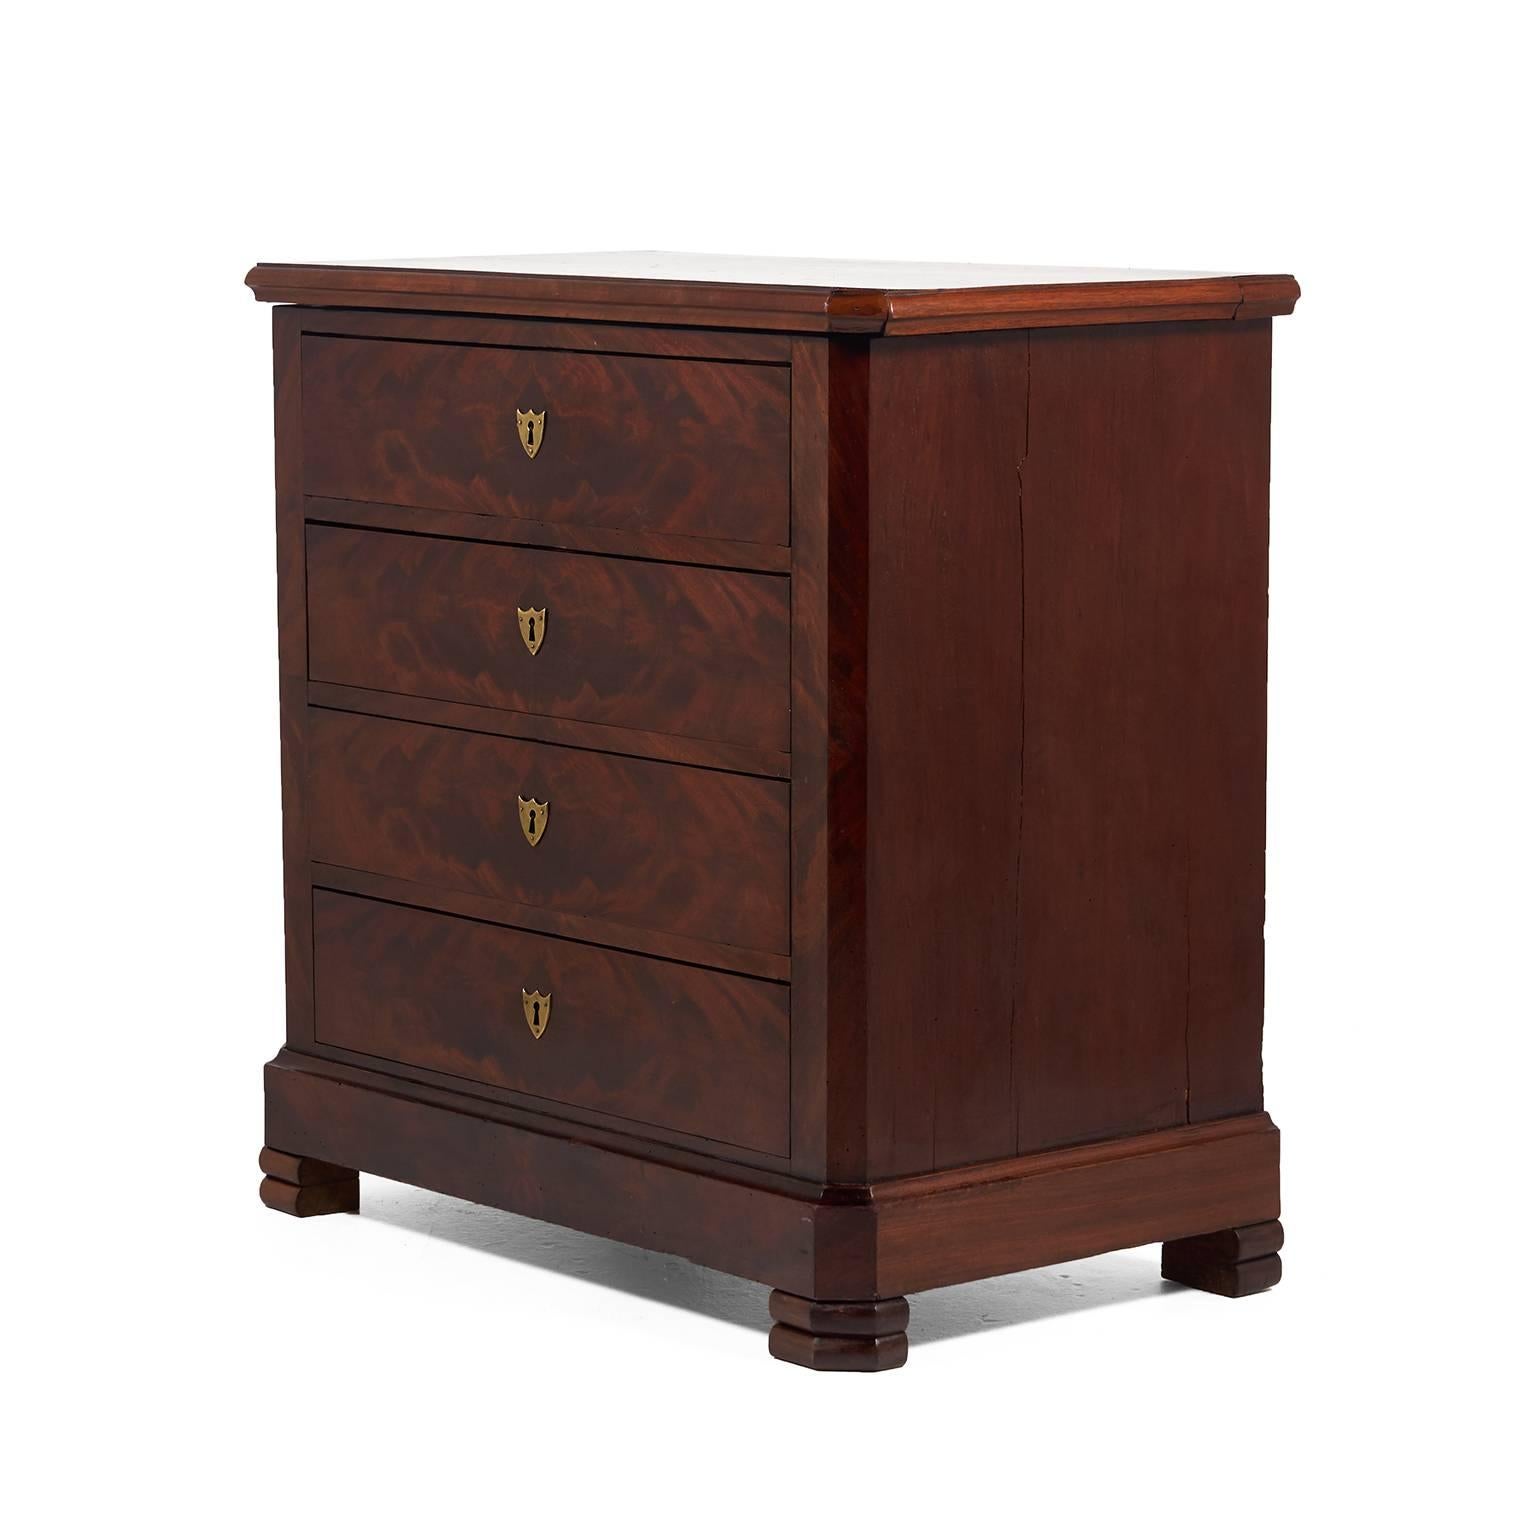 An unusually-small, French flame mahogany four-drawer chest, or commode, with beautiful brass plate shield escutcheons, circa 1870.



